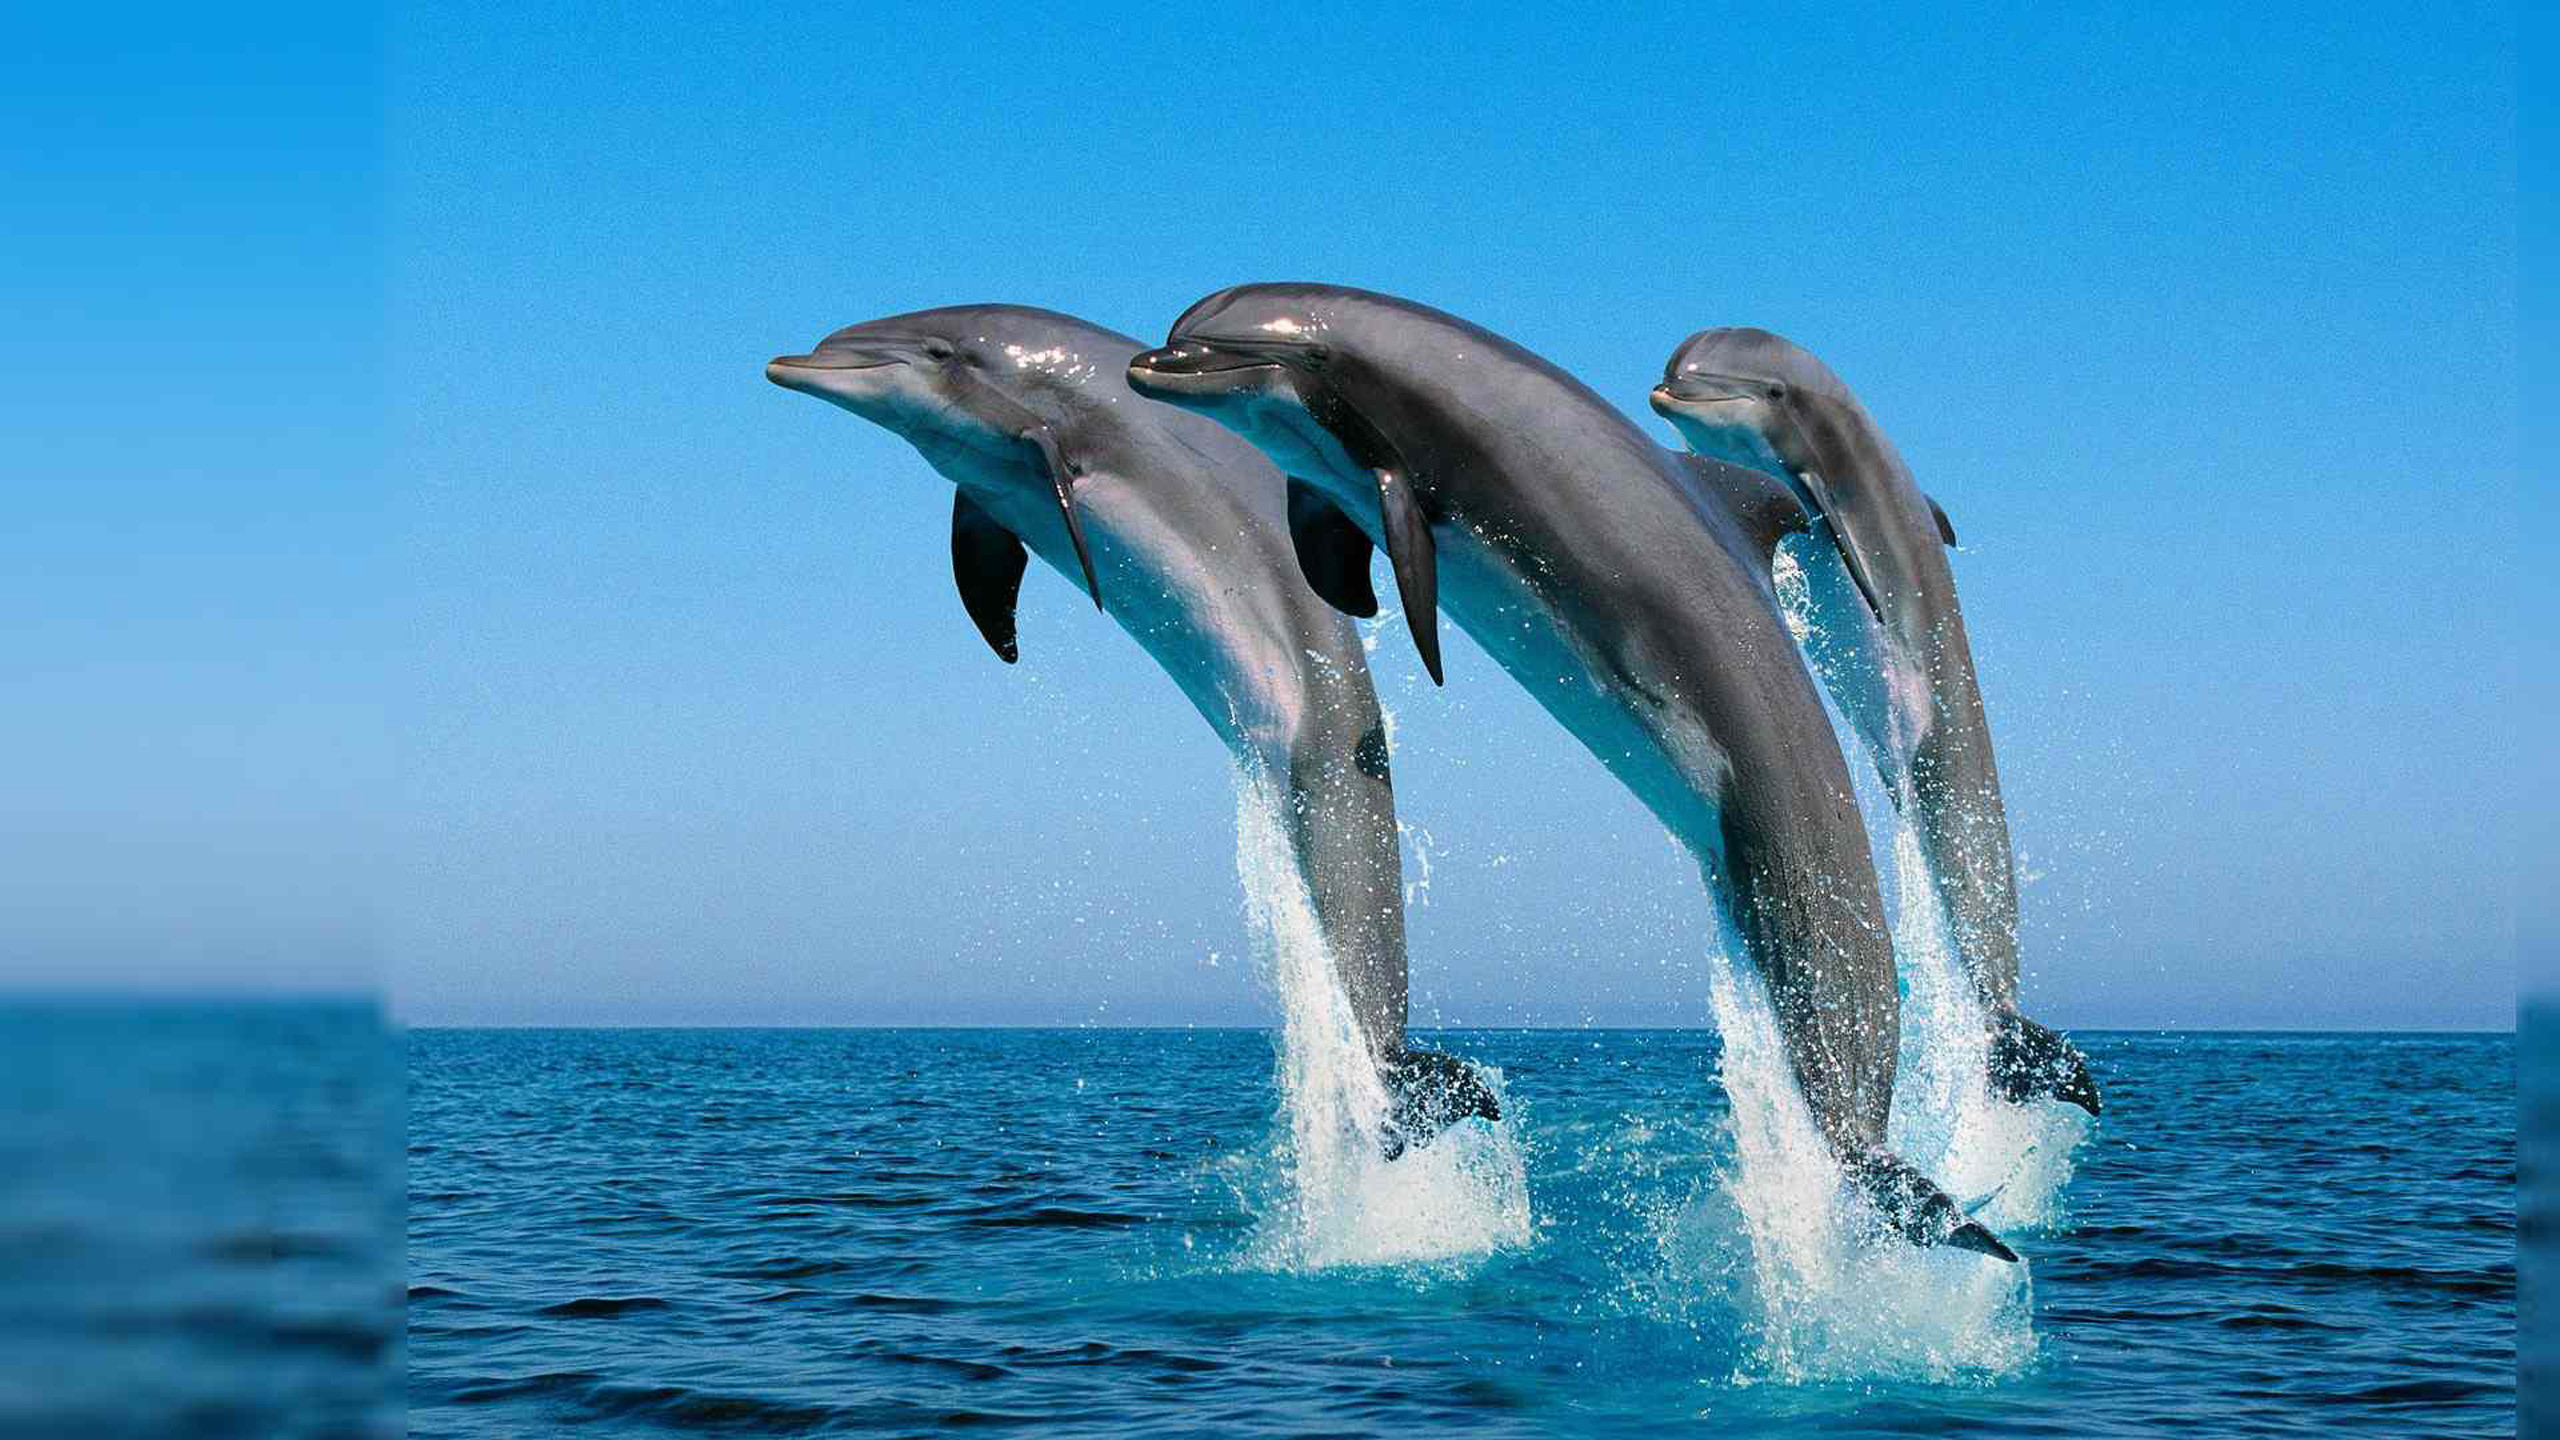 Dolphins Jump In The Air To The Caribbean Sea Summer Hd Wallpapers For  Desktop : Wallpapers13.com